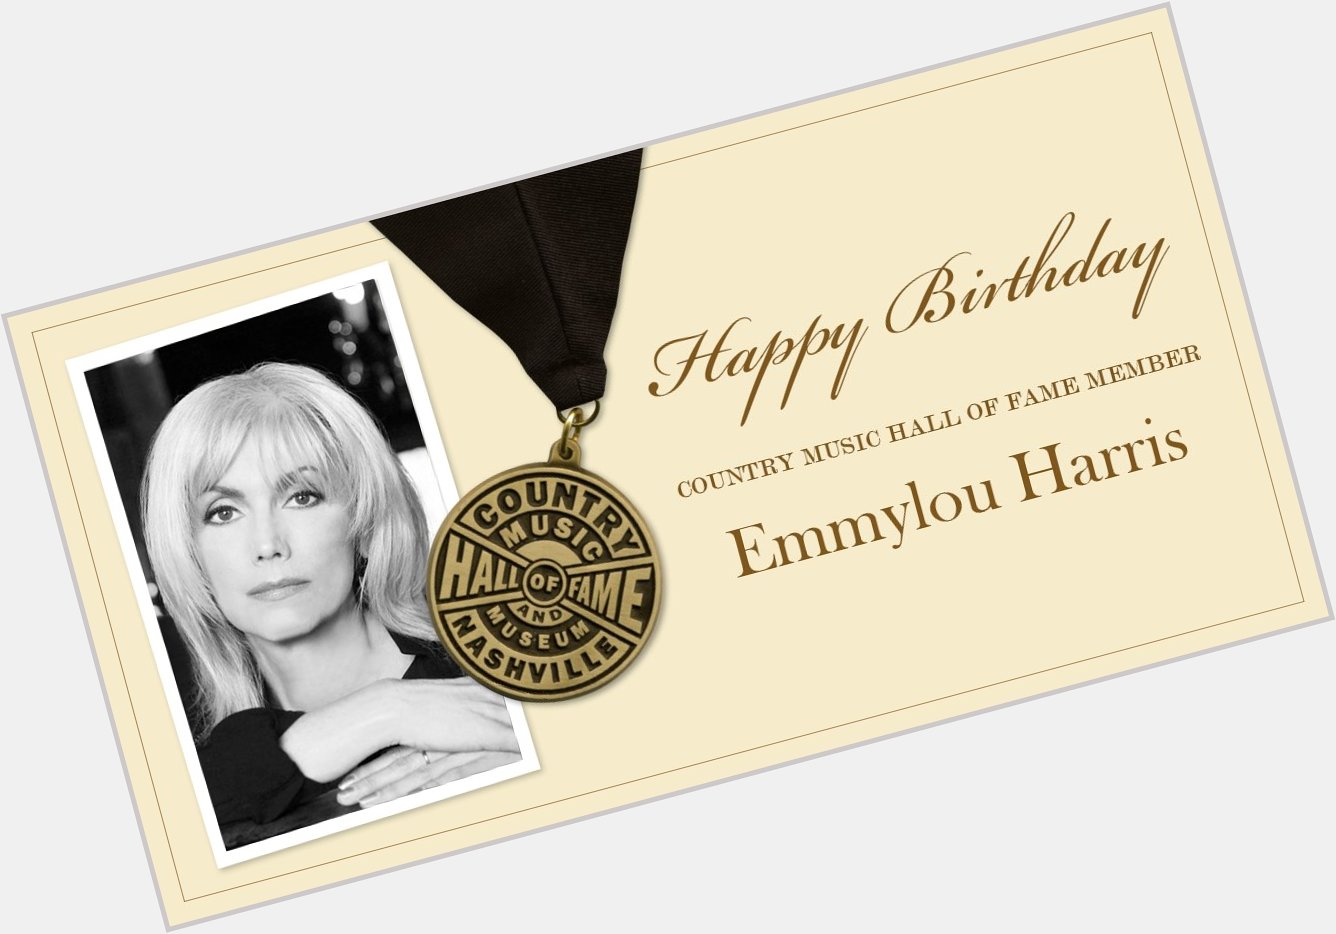 Join us in wishing member Emmylou Harris a very happy birthday! 